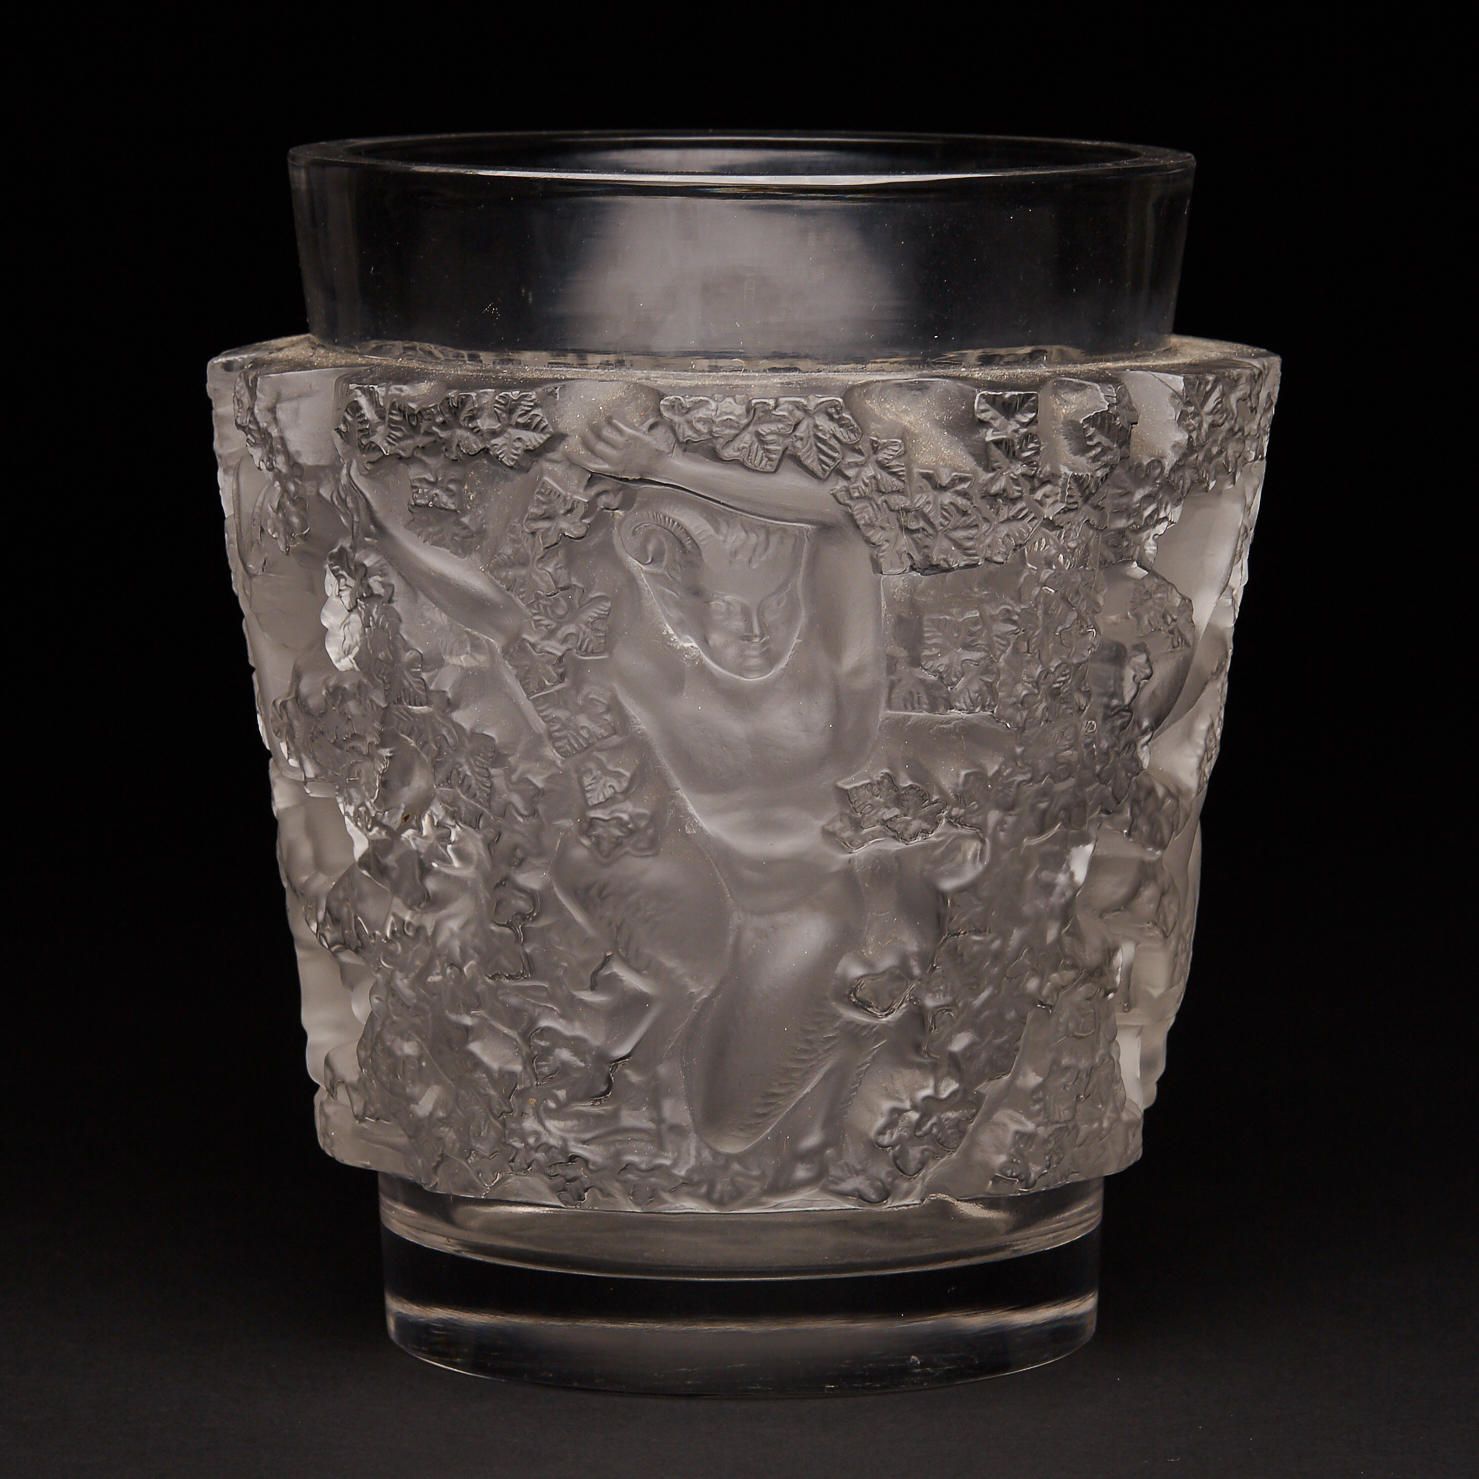 ‘Bacchus’, Lalique Moulded and Partly Frosted Glass Vase, post-1945